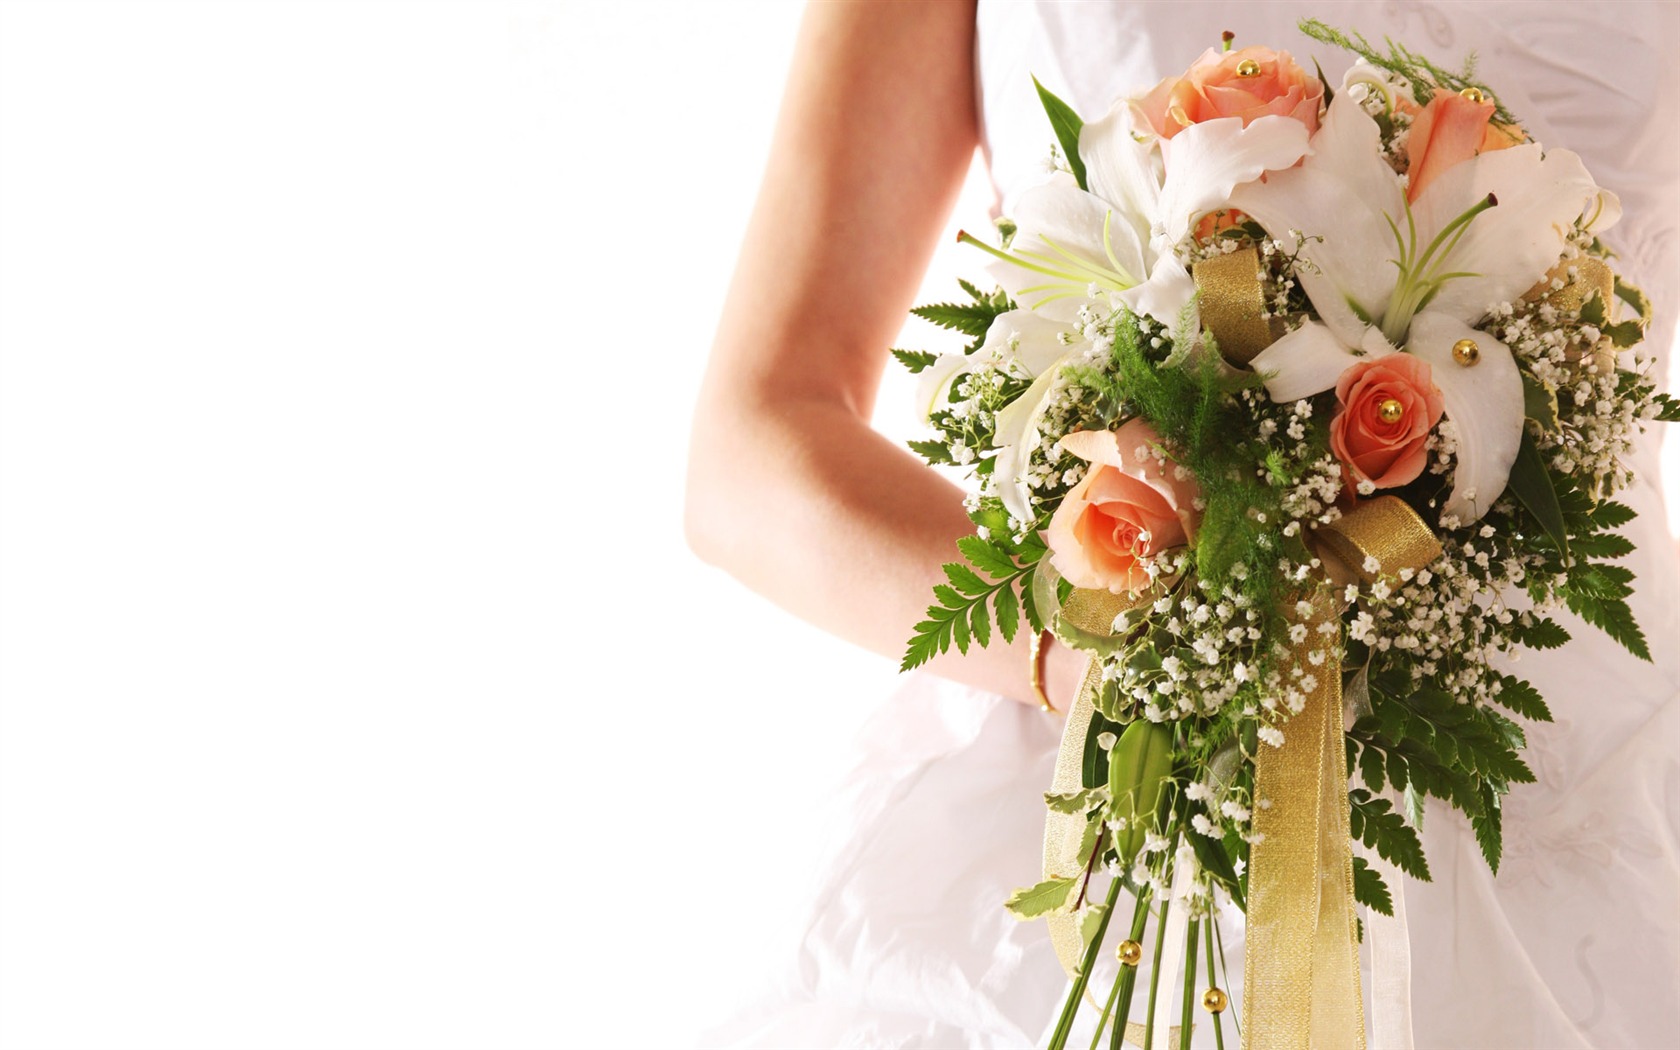 Weddings and Flowers wallpaper (1) #12 - 1680x1050